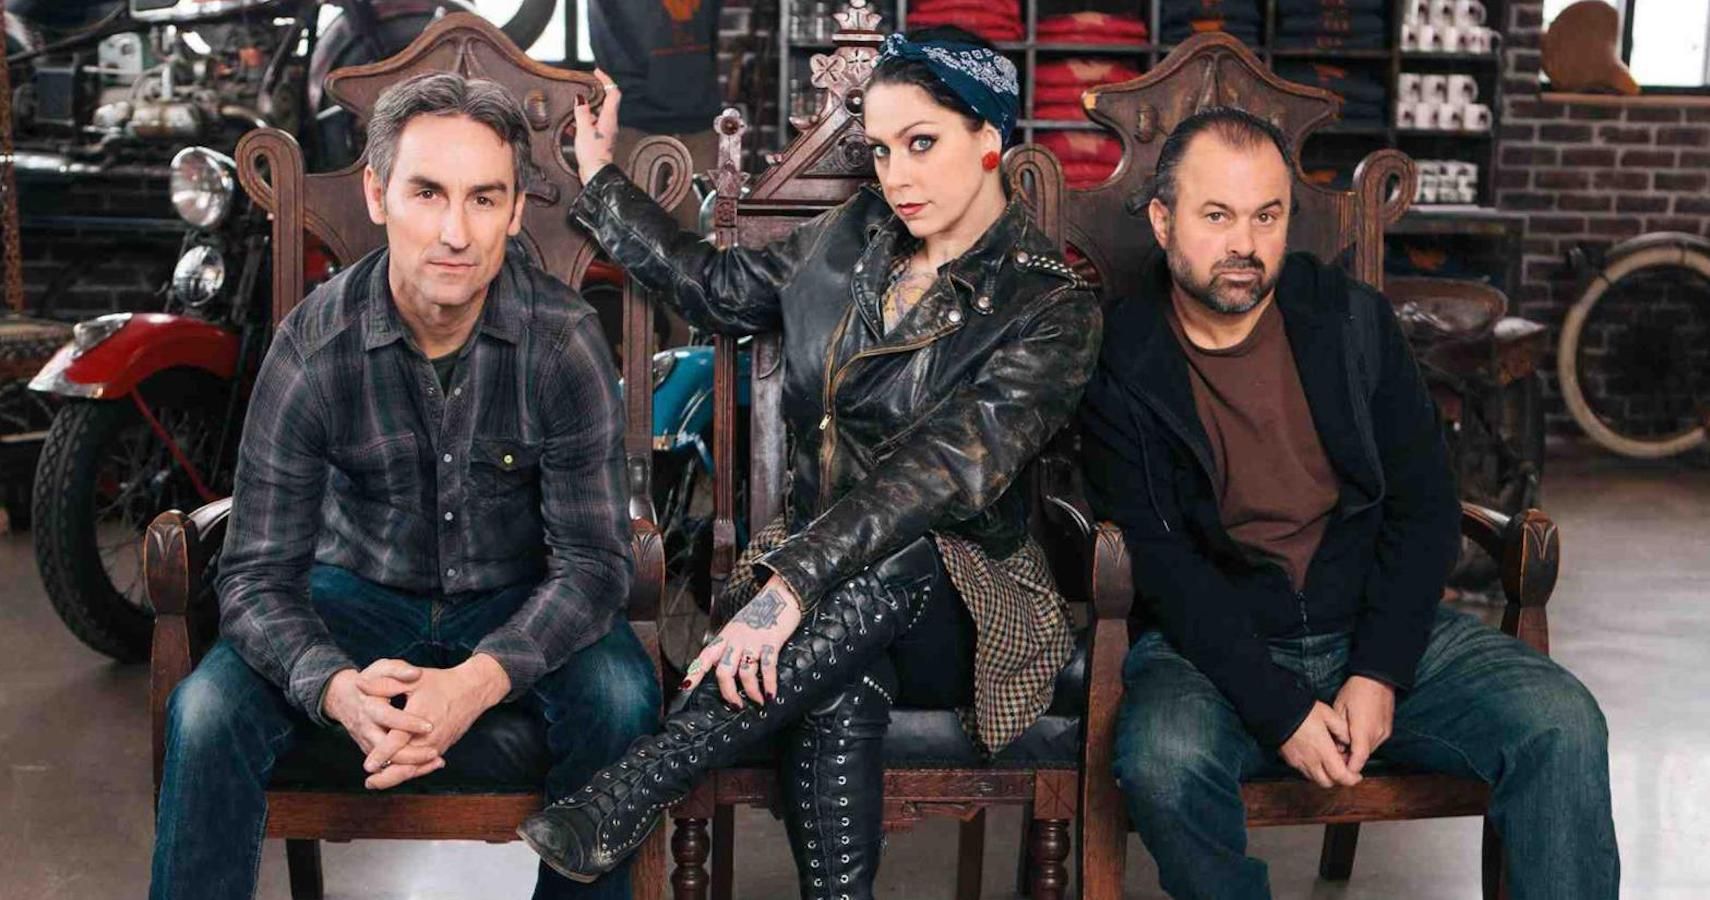 American Pickers Mike And Danielle Announce New Episodes While Back On